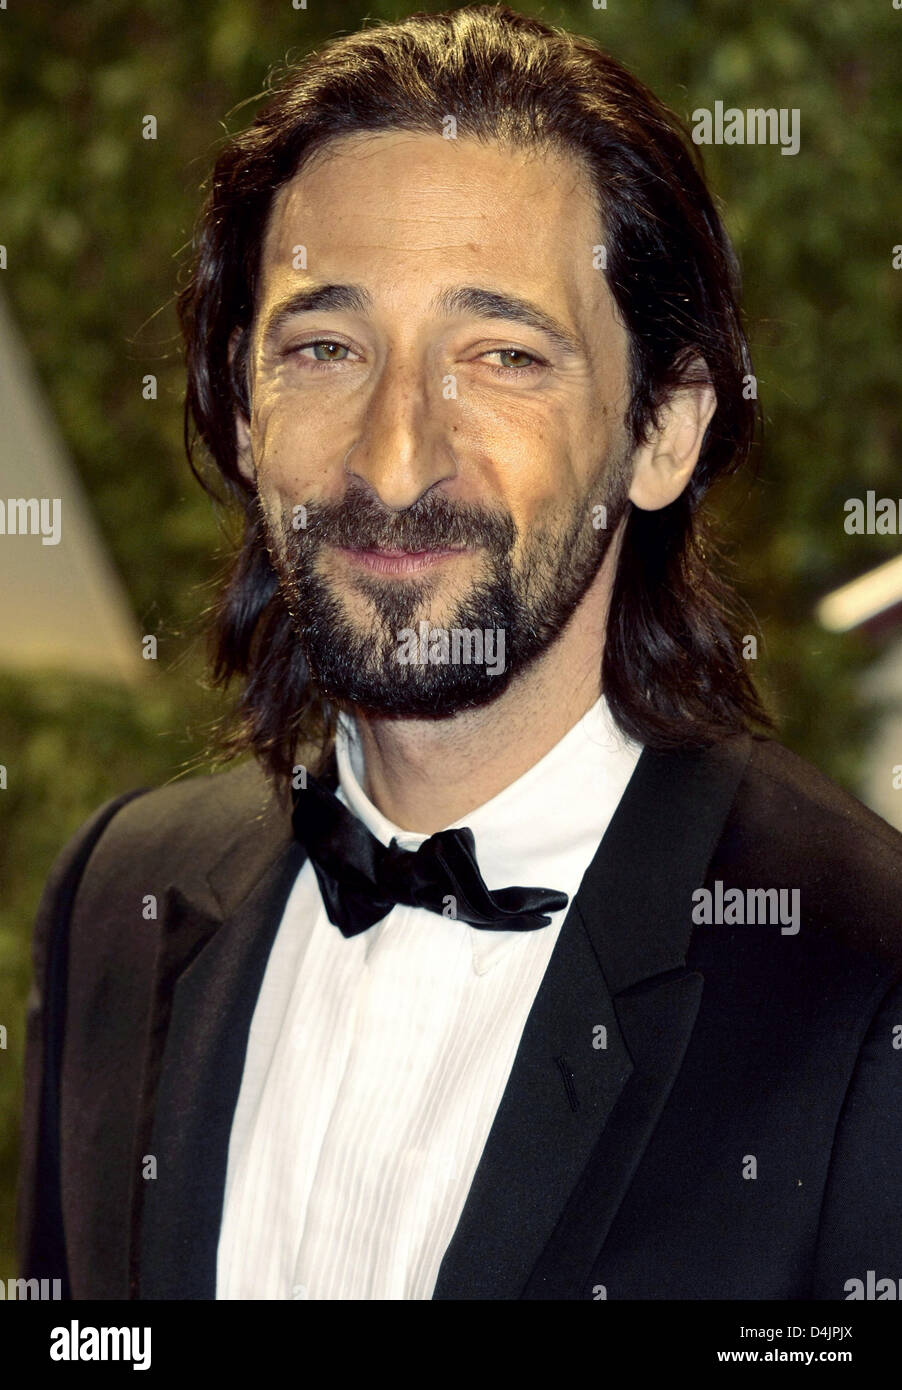 US actor Adrien Brody arrives at the Vanity Fair Oscar Party at Sunset Towers in Los Angeles, CA, United Statess, 22 February 2009. Photo: Hubert Boesl Stock Photo